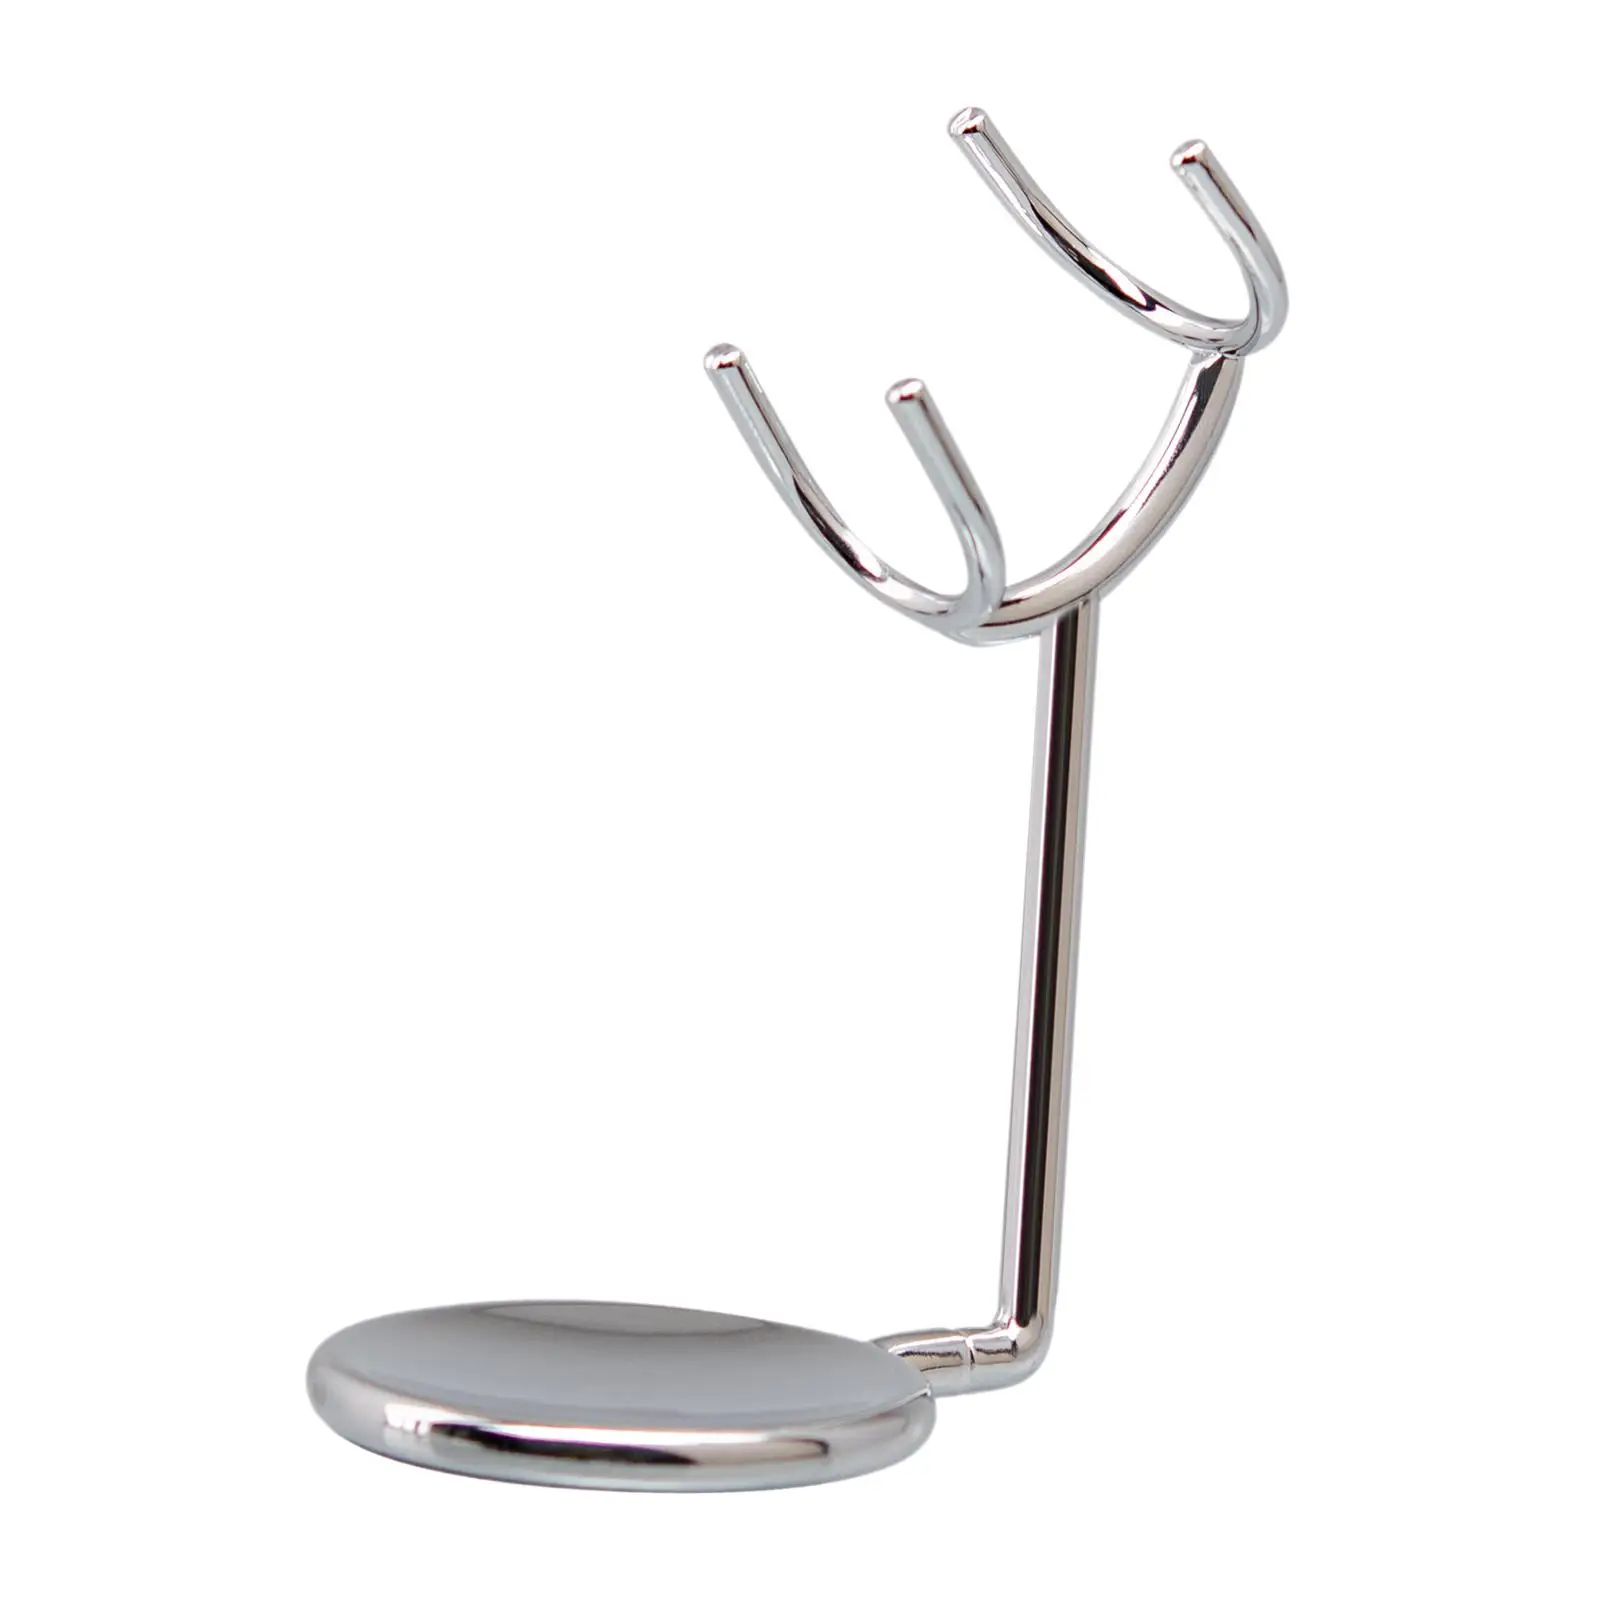 Shaver Desktop Holder Stand Gifts Bathroom Accessories Free Standing Storage Organization Extra Stability Weighted Base Alloy